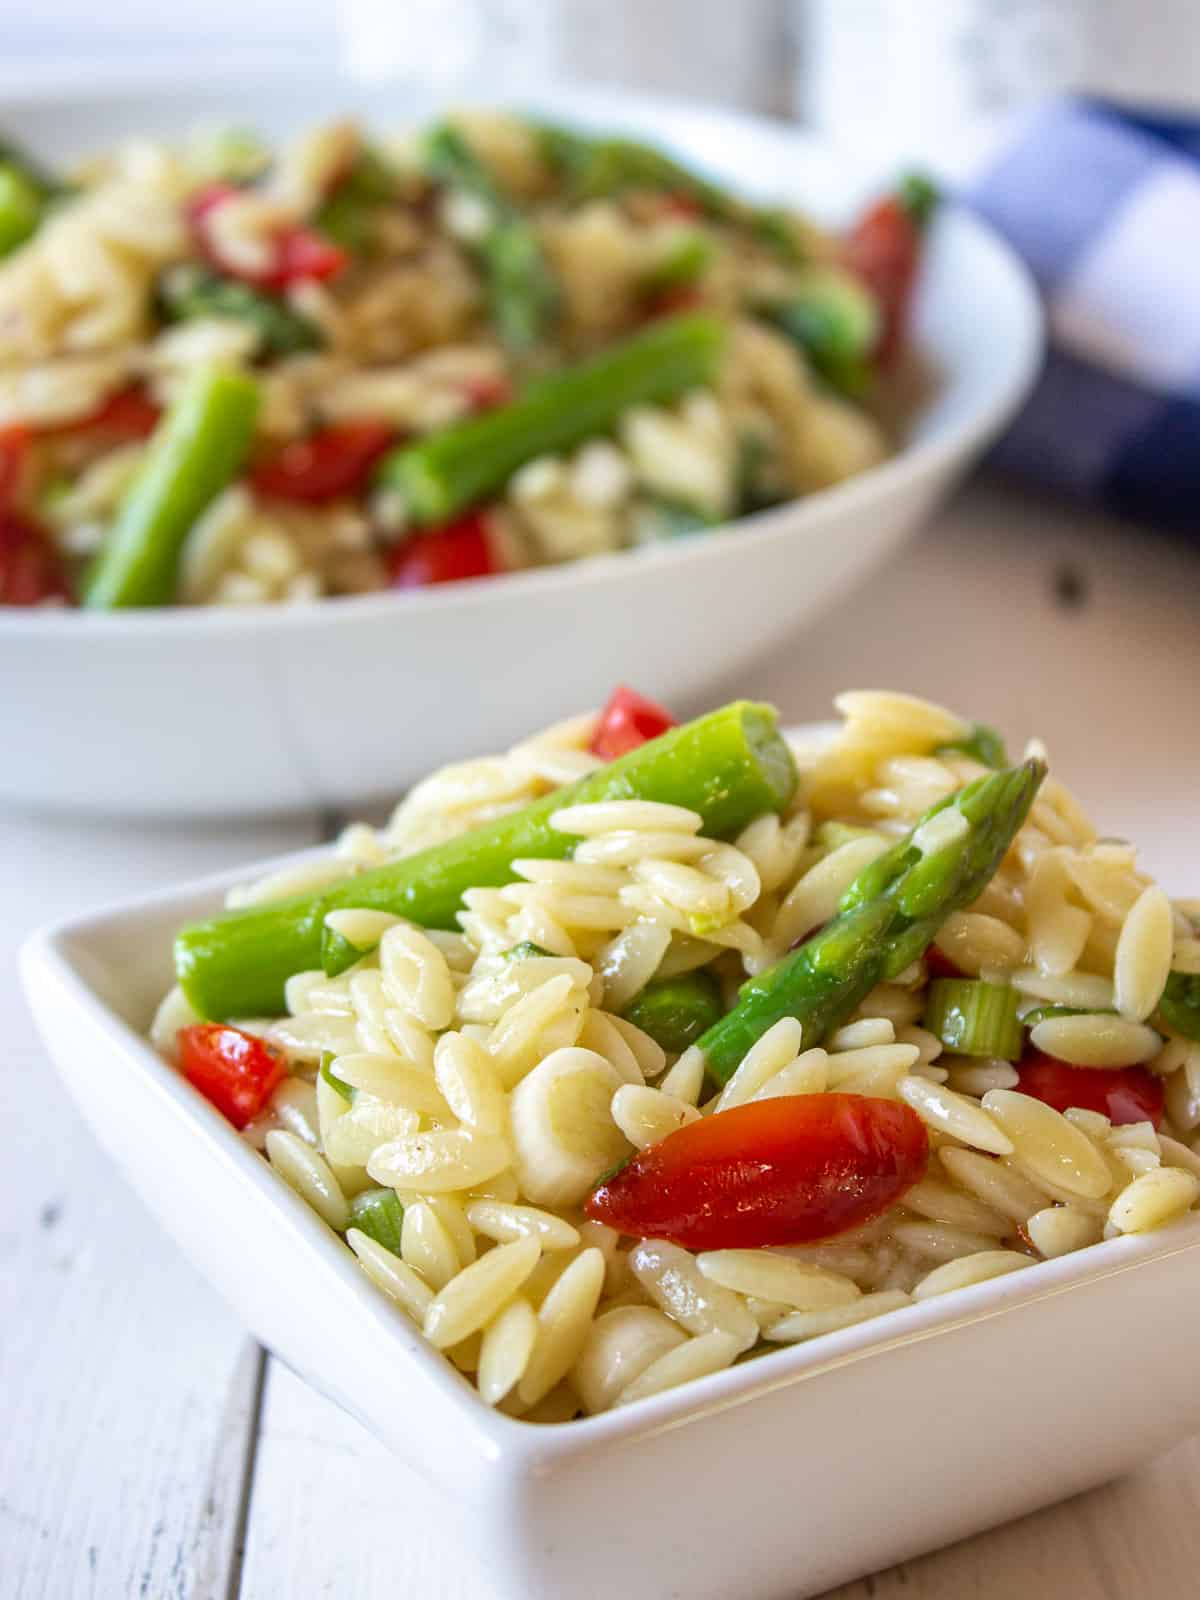 Pasta salad in a small dish.